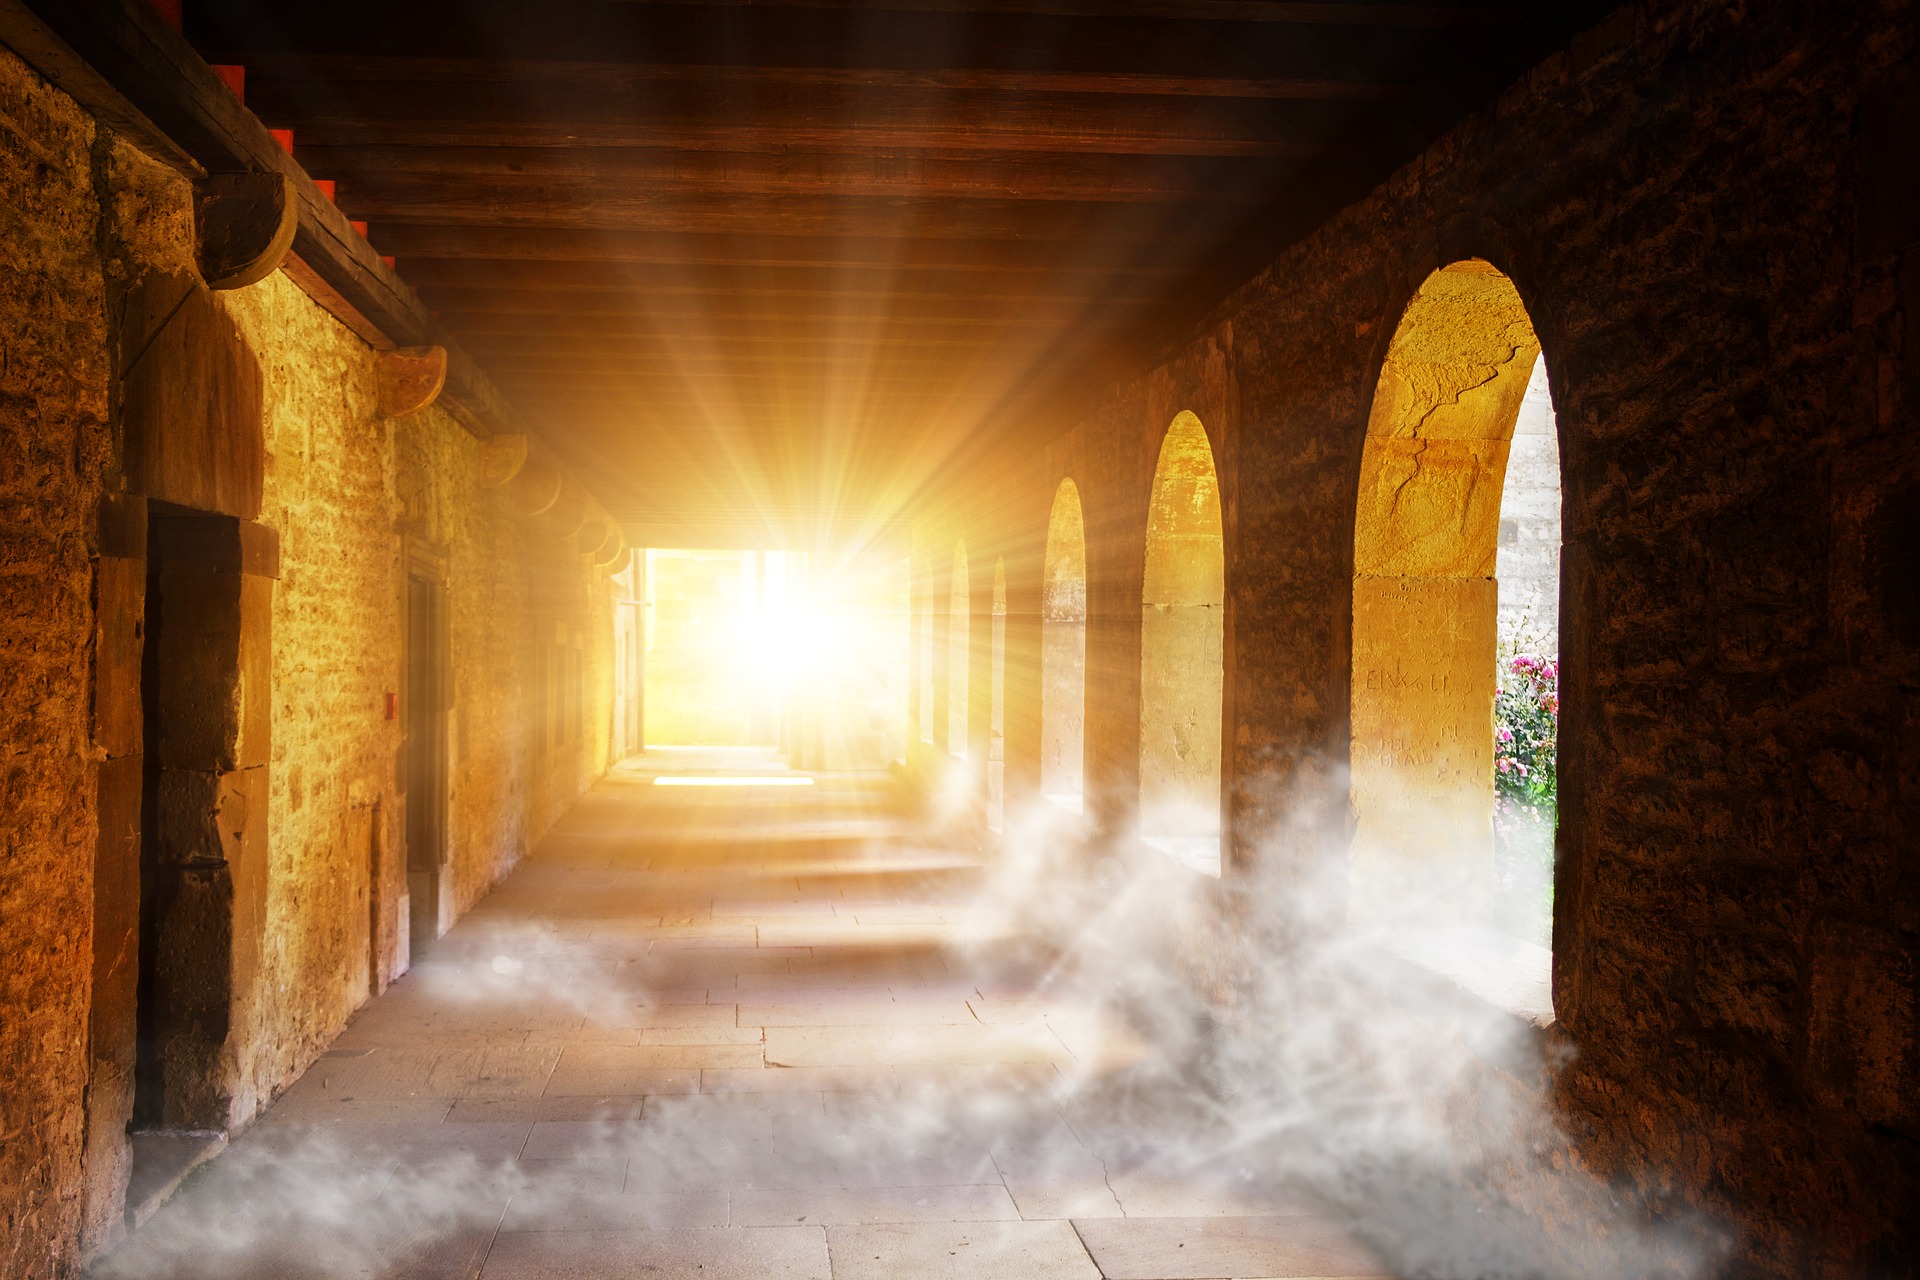 Powerful sun light shines through the cloister of a fortress